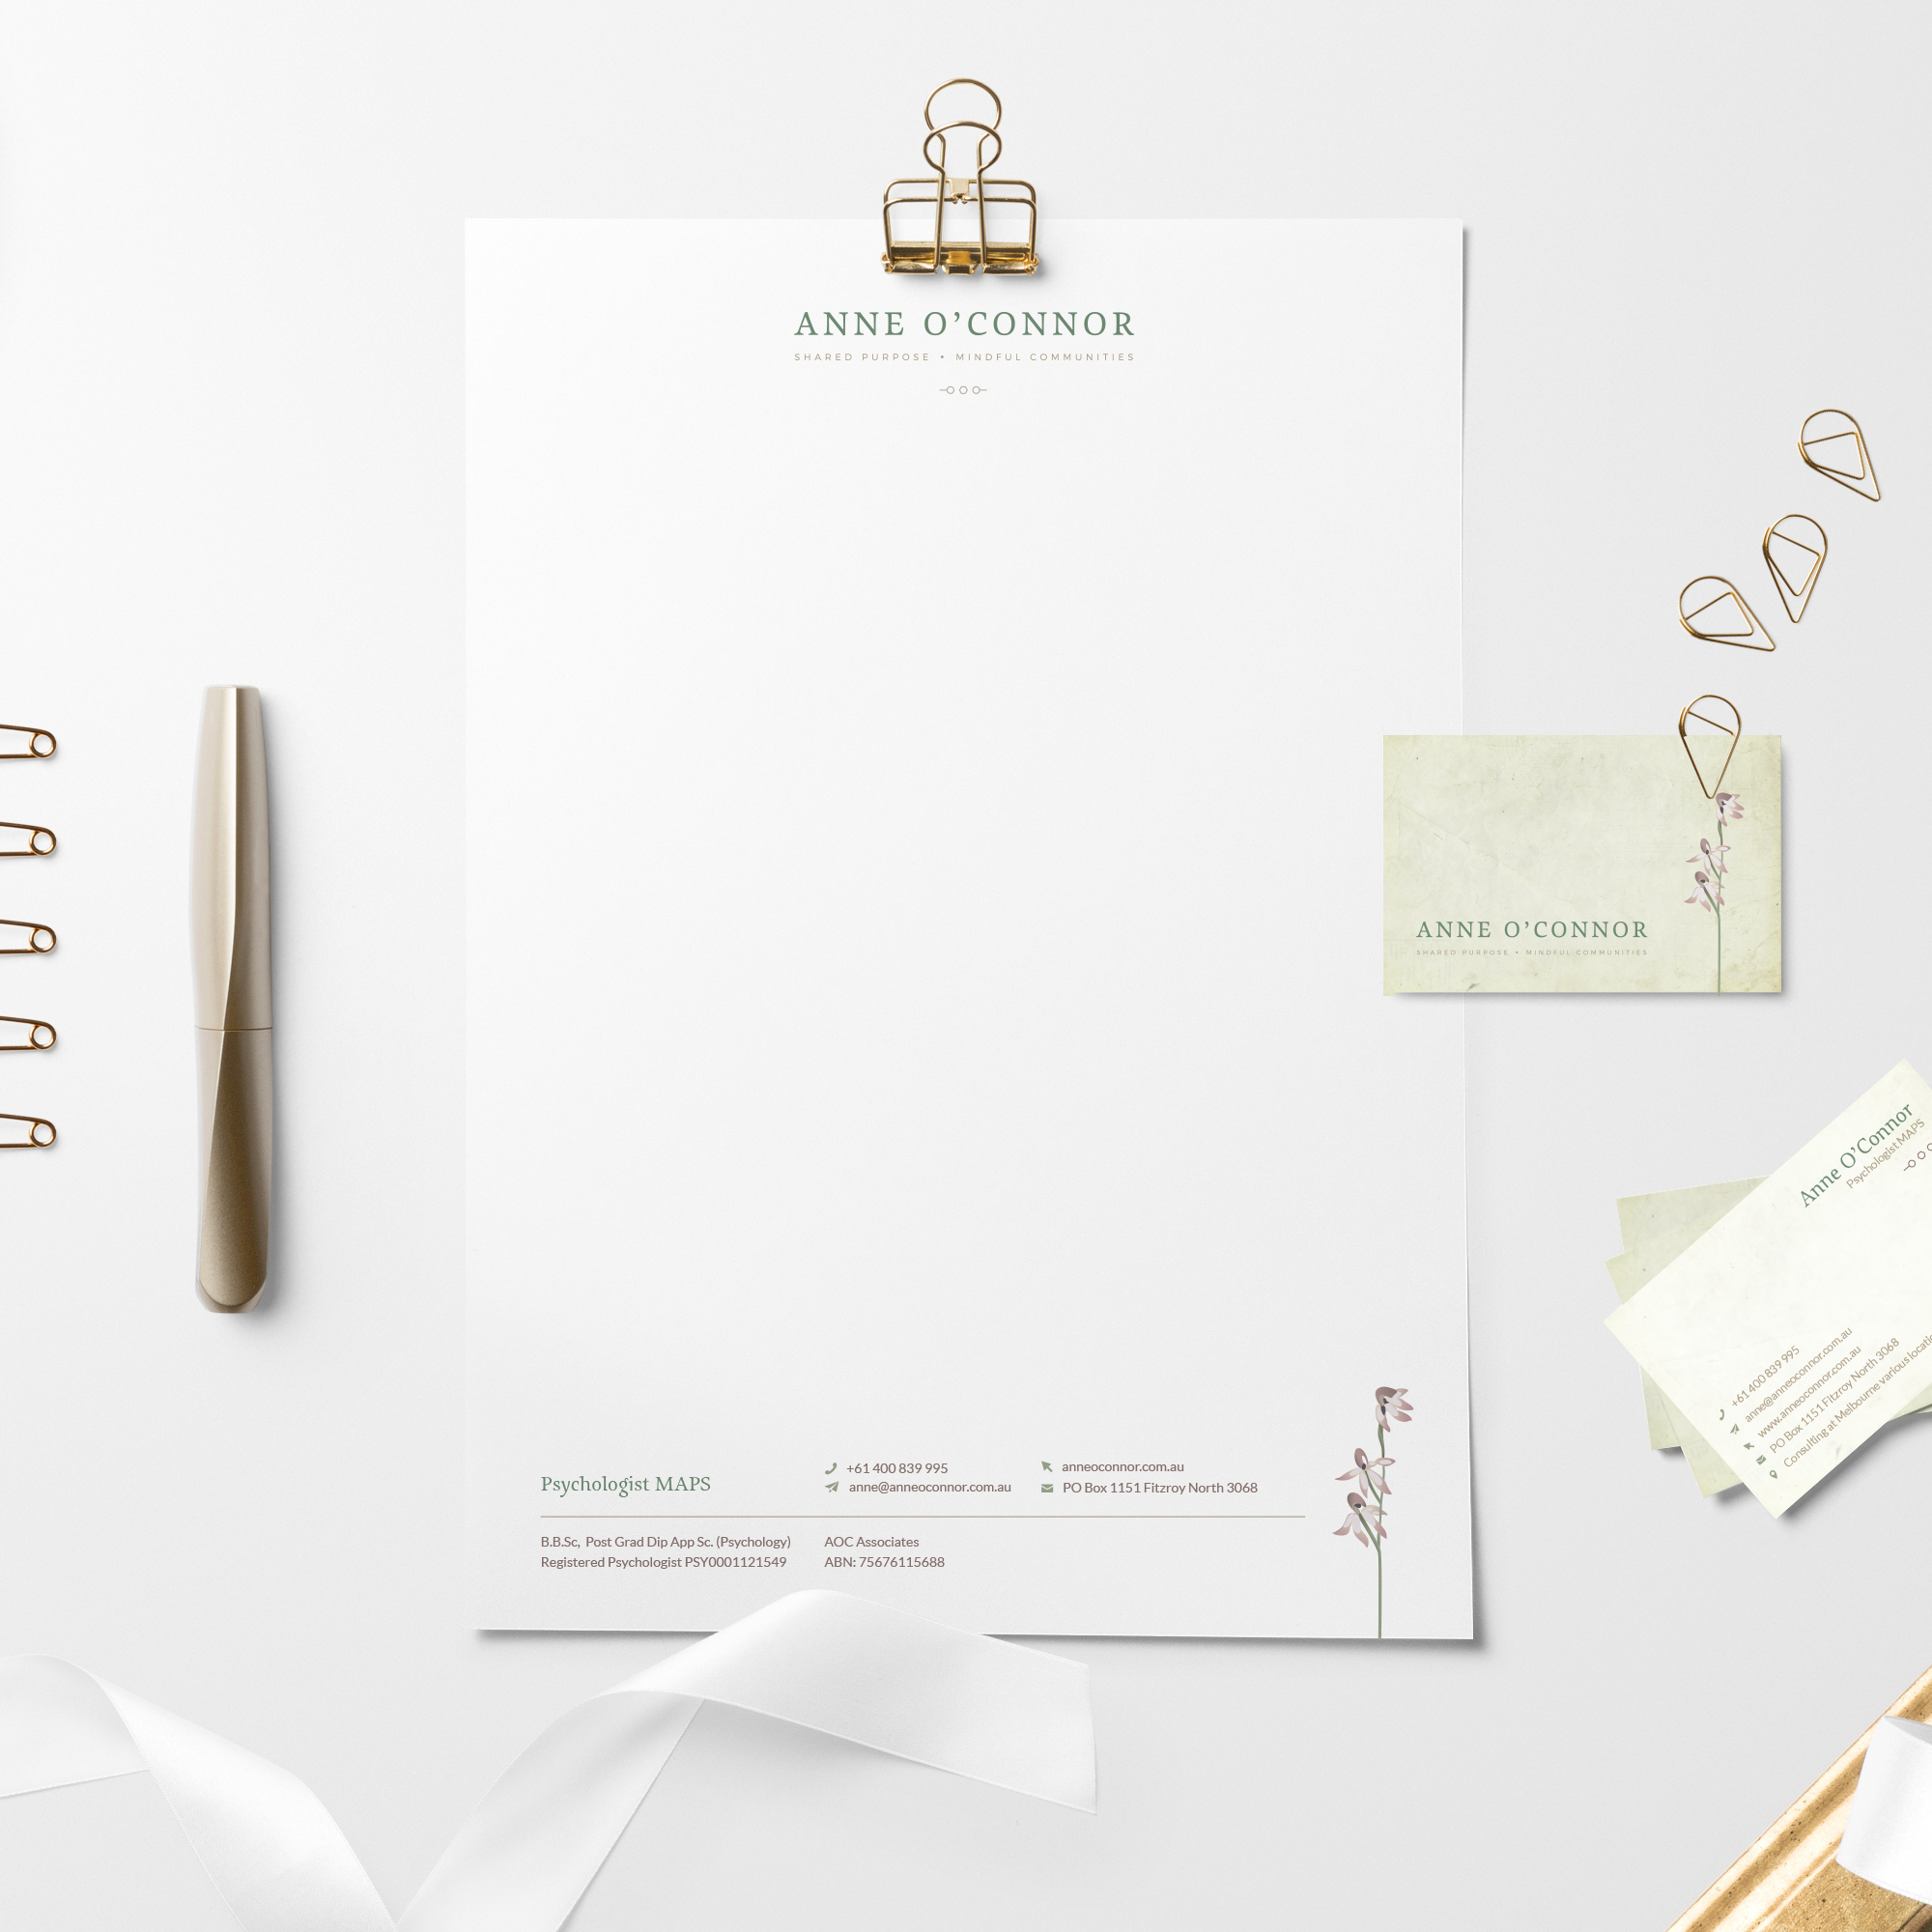 Anne O'Connor stationery